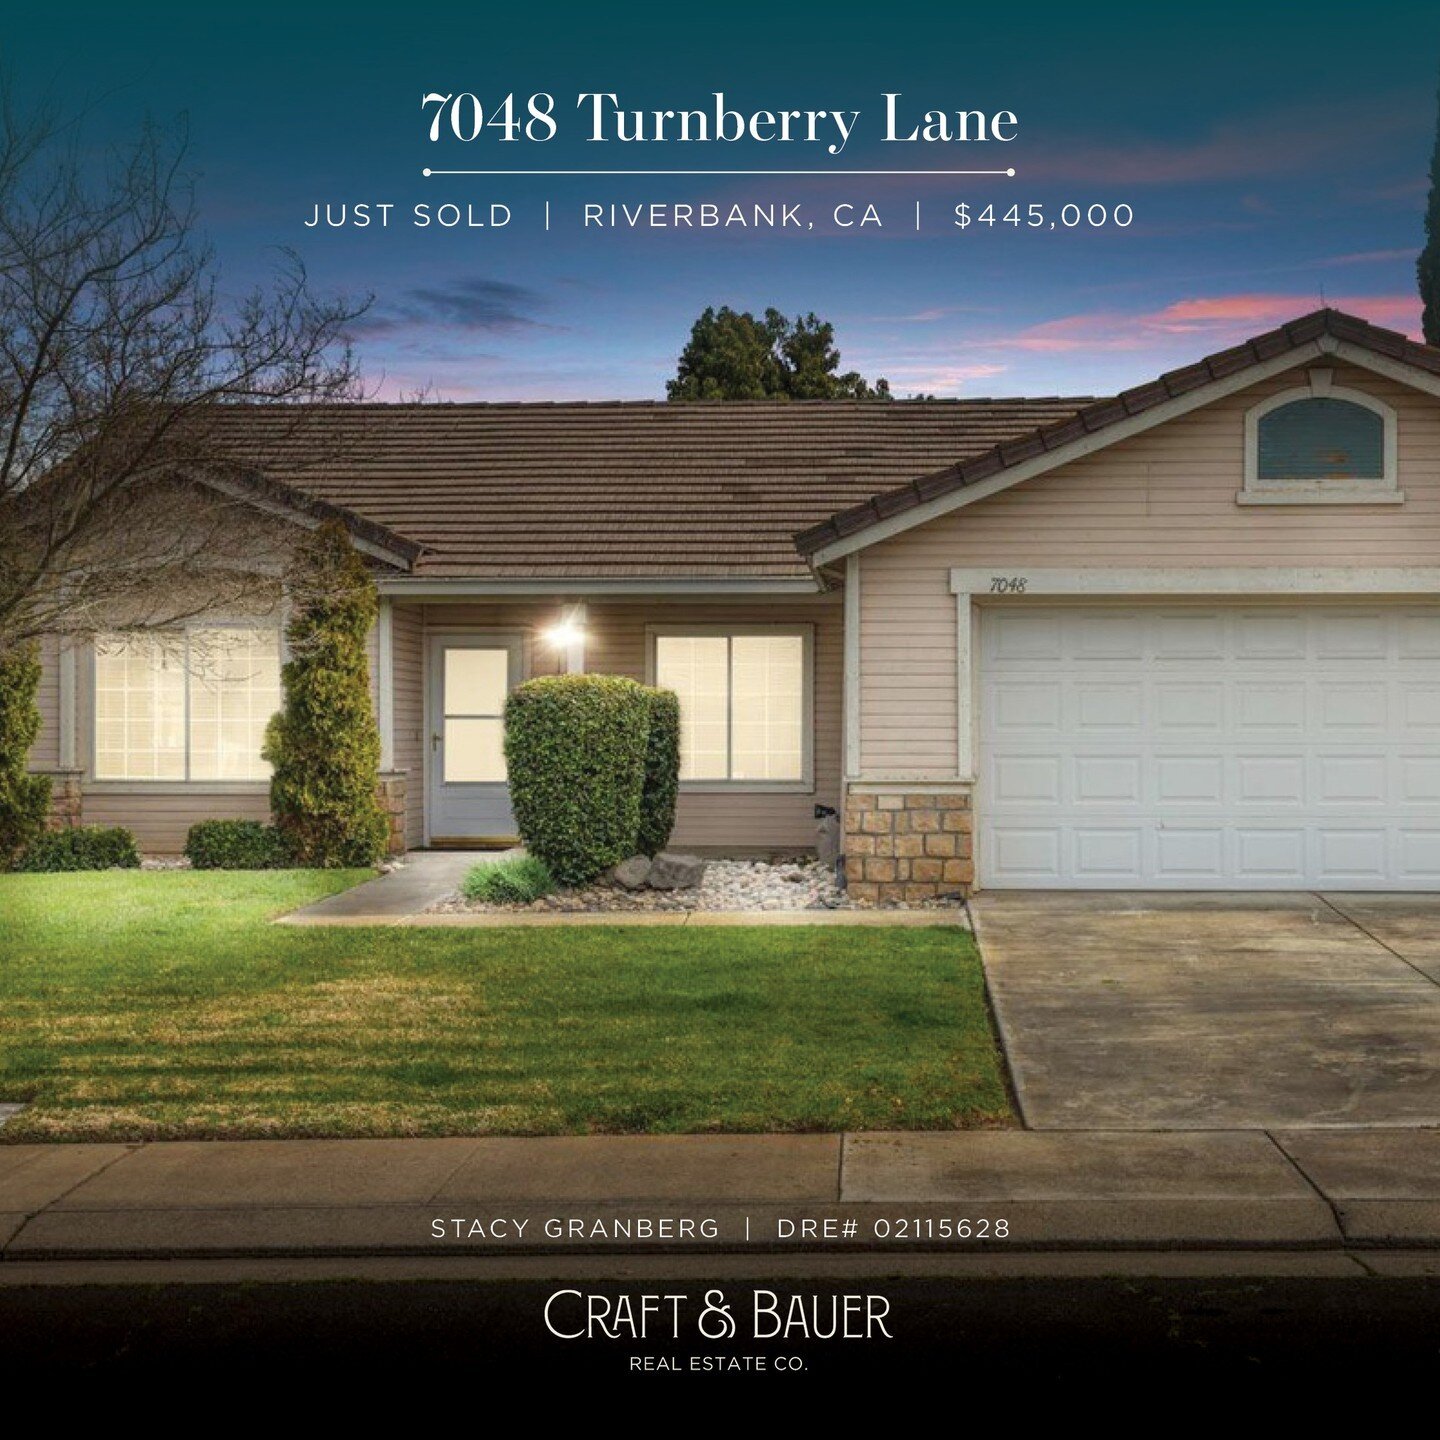 JUST SOLD 🤩 Congratulations to the new owners of this lovely 3-bedroom home located in the desirable and established River Cove neighborhood!⁠
⁠
🏡 7048 Turnberry Lane⁠
📍 Riverbank, CA⁠
💰 $445,000⁠
⁠
Enjoy your summer nights on the patio, or take 